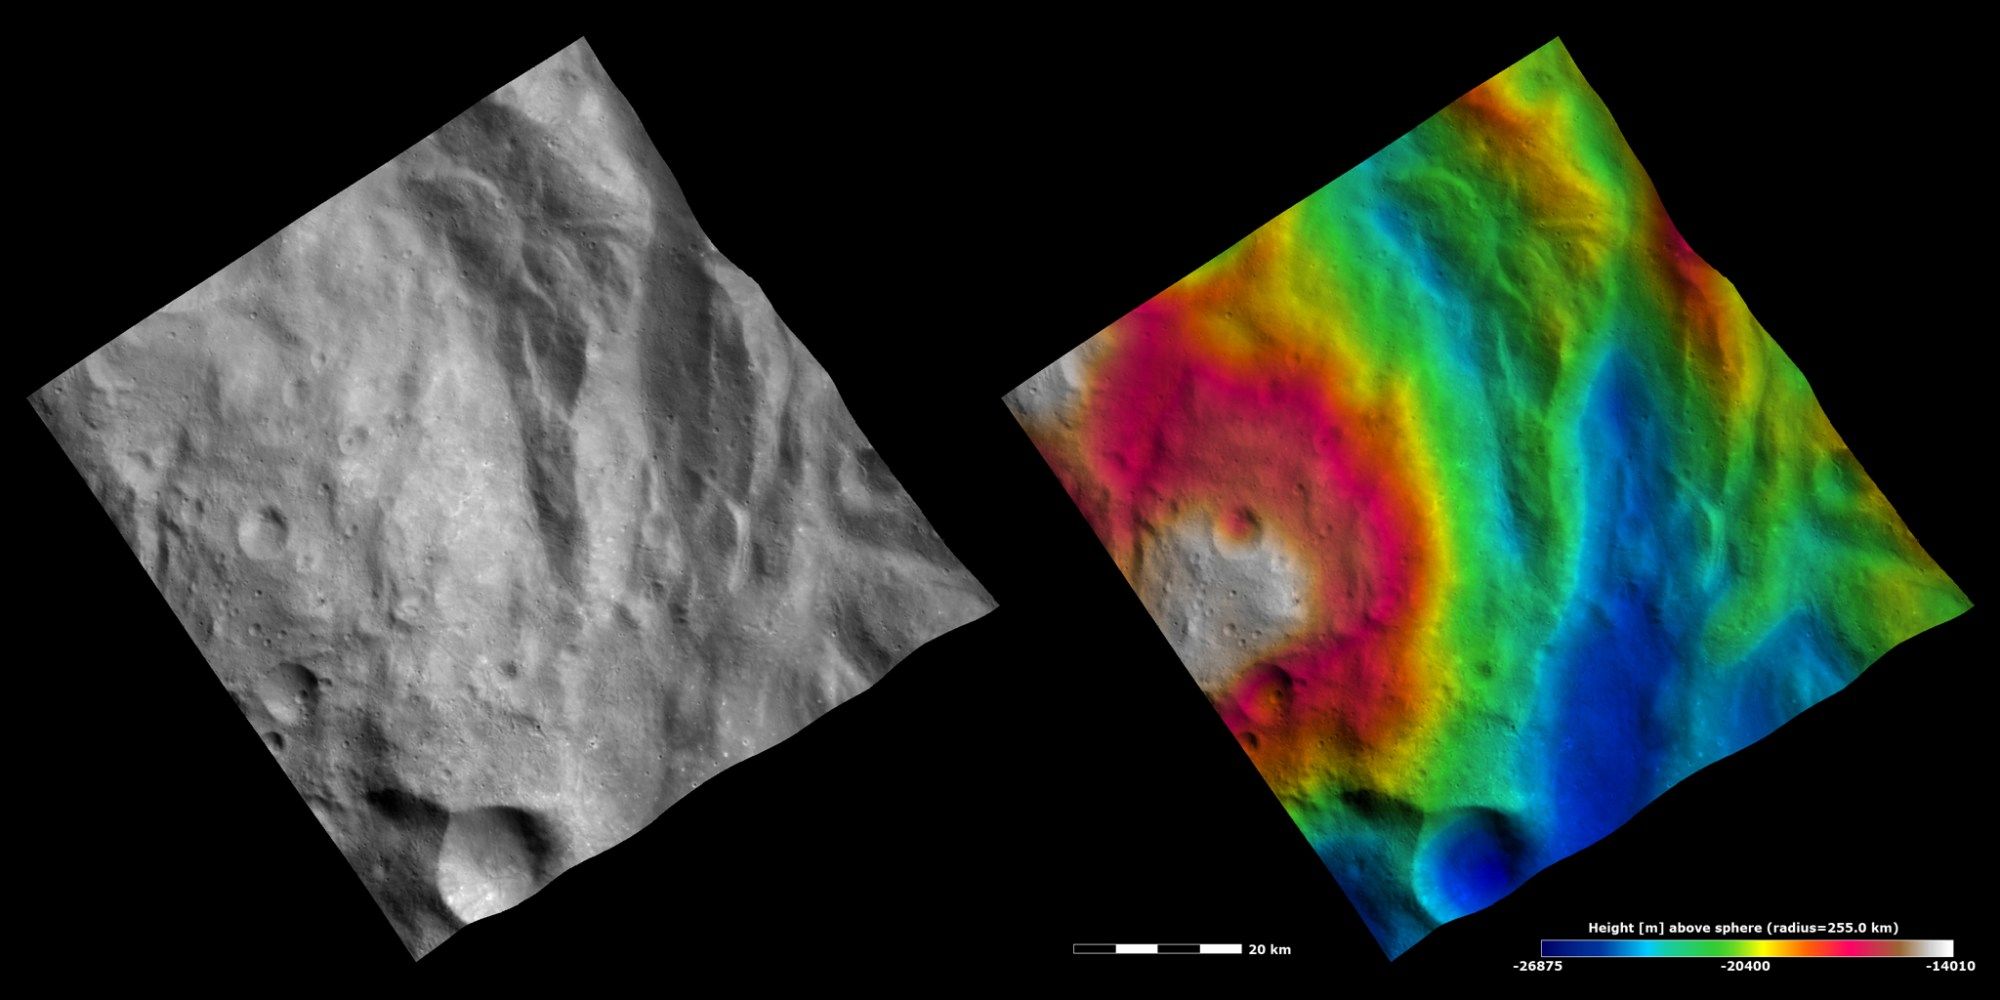 Topography and Albedo Image of Central Complex and Hummocky Terrain